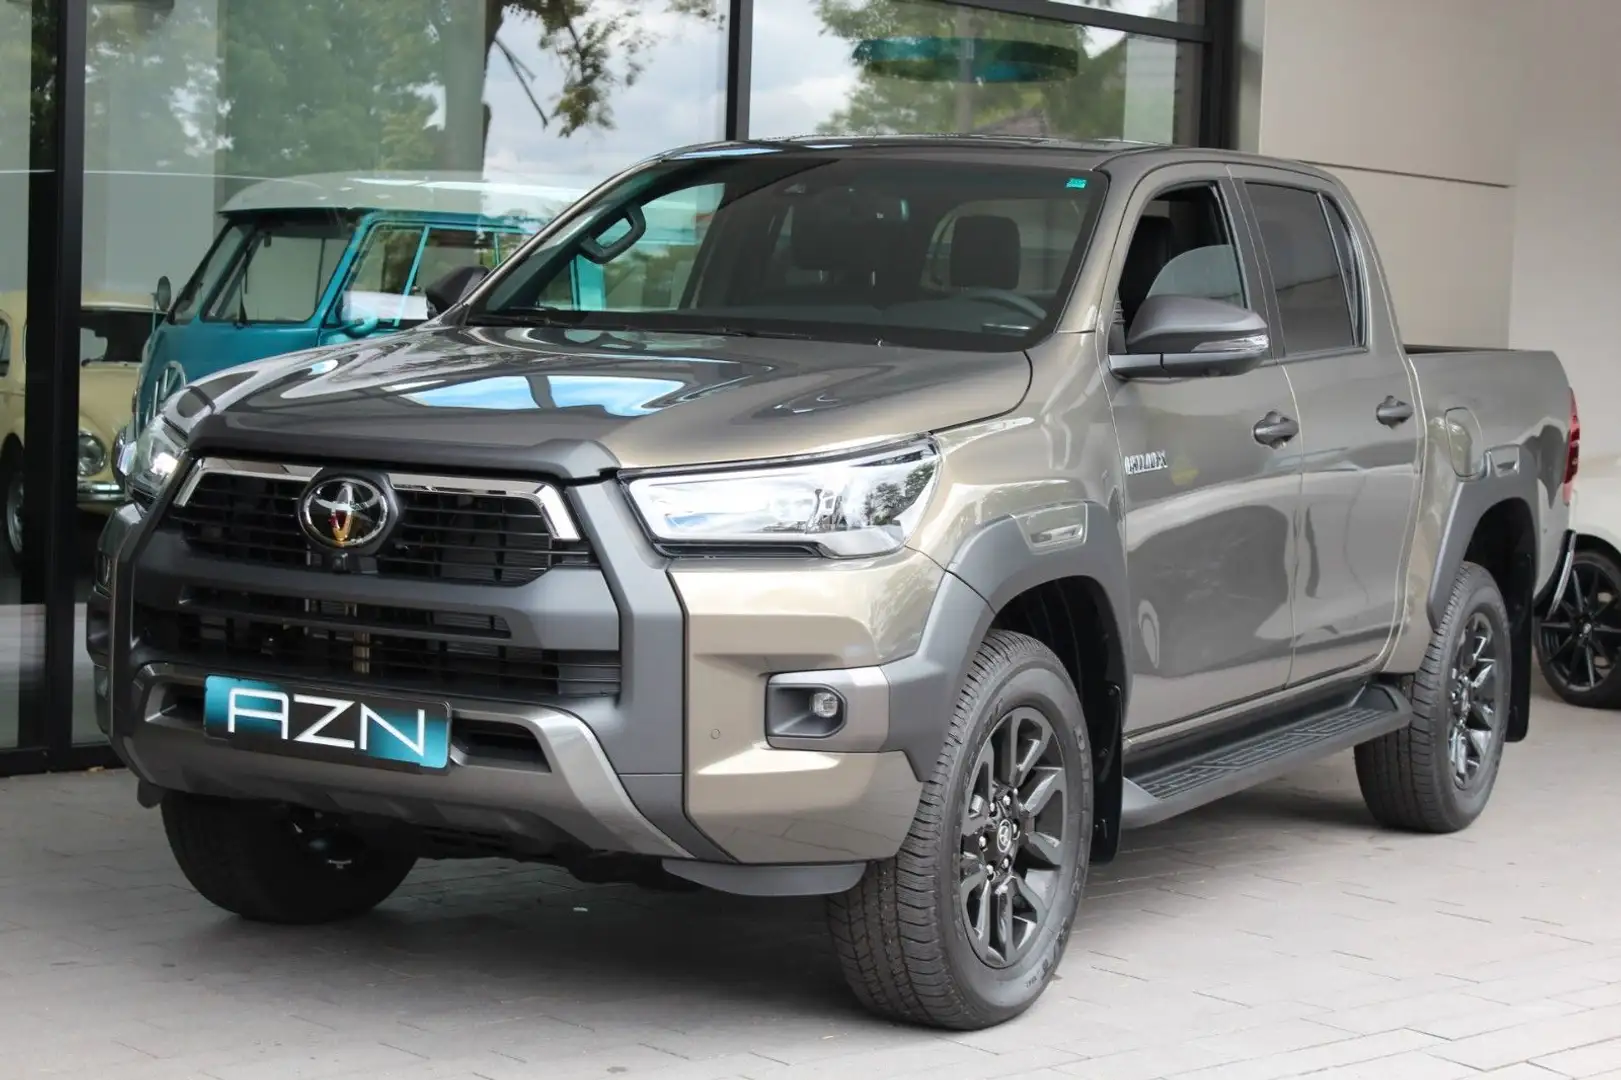 Toyota Hilux Double Cab Invincible 4x4 Braun - 1